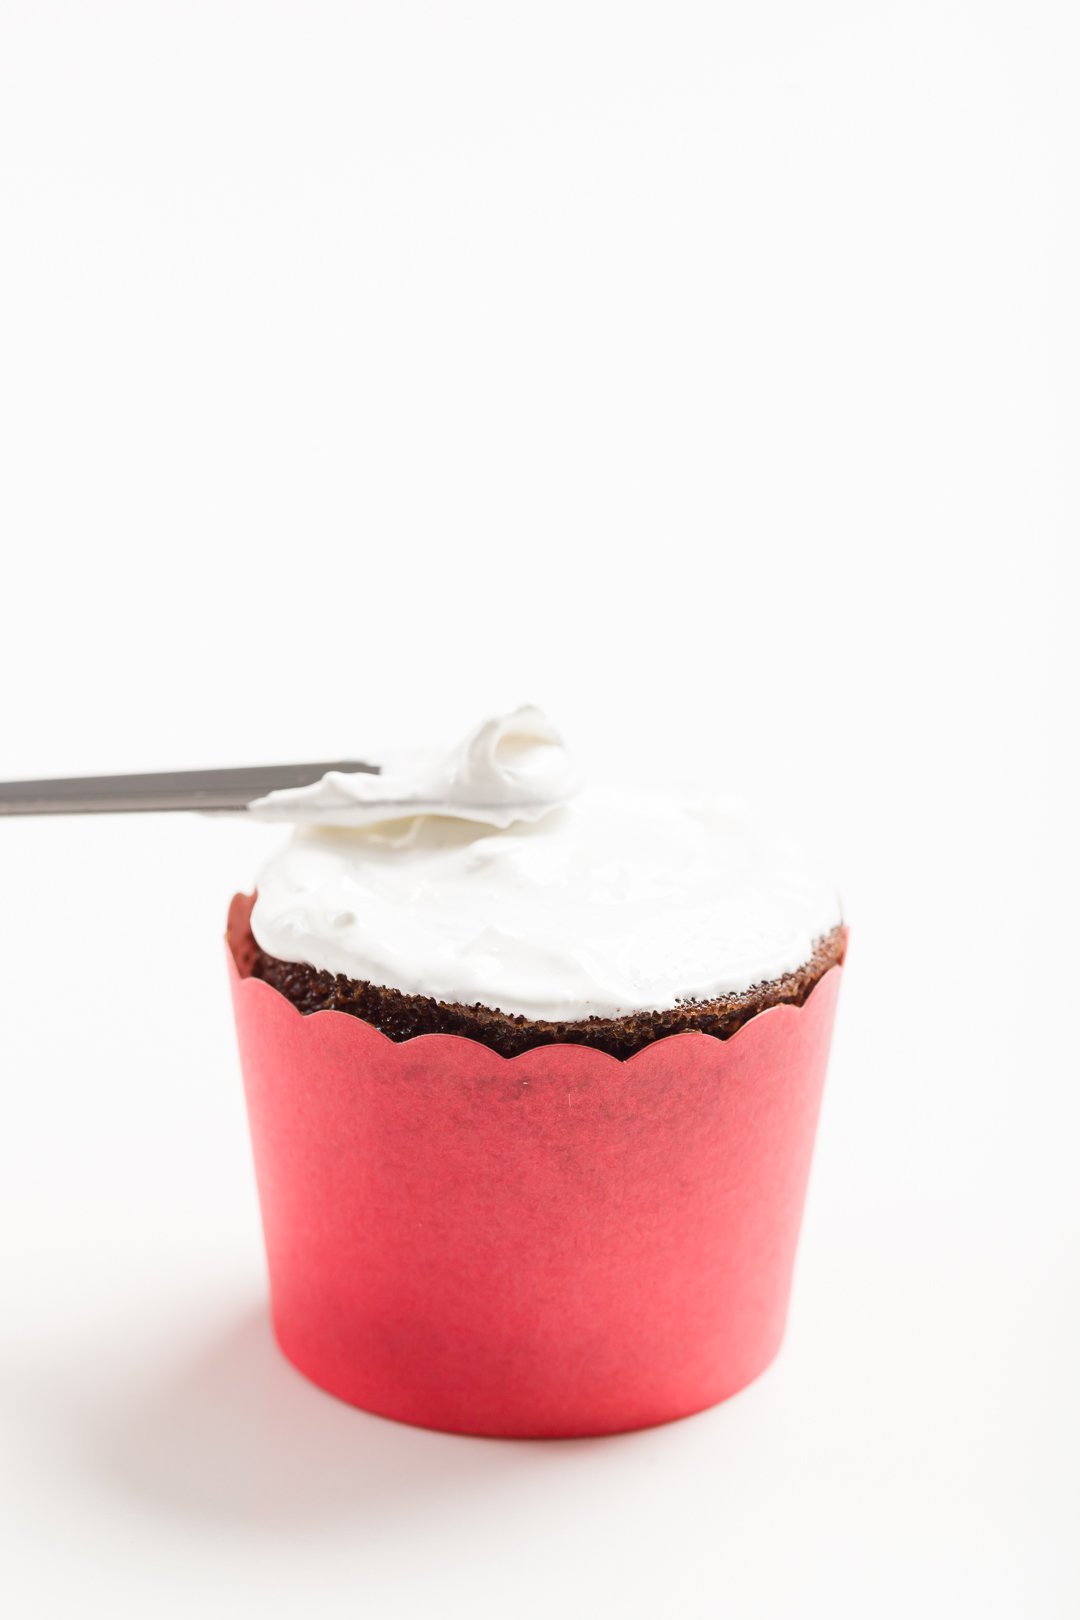 head-on view of spreading a thin layer of marshmallow frosting on top of a chocolate cupcake in a red baking cup